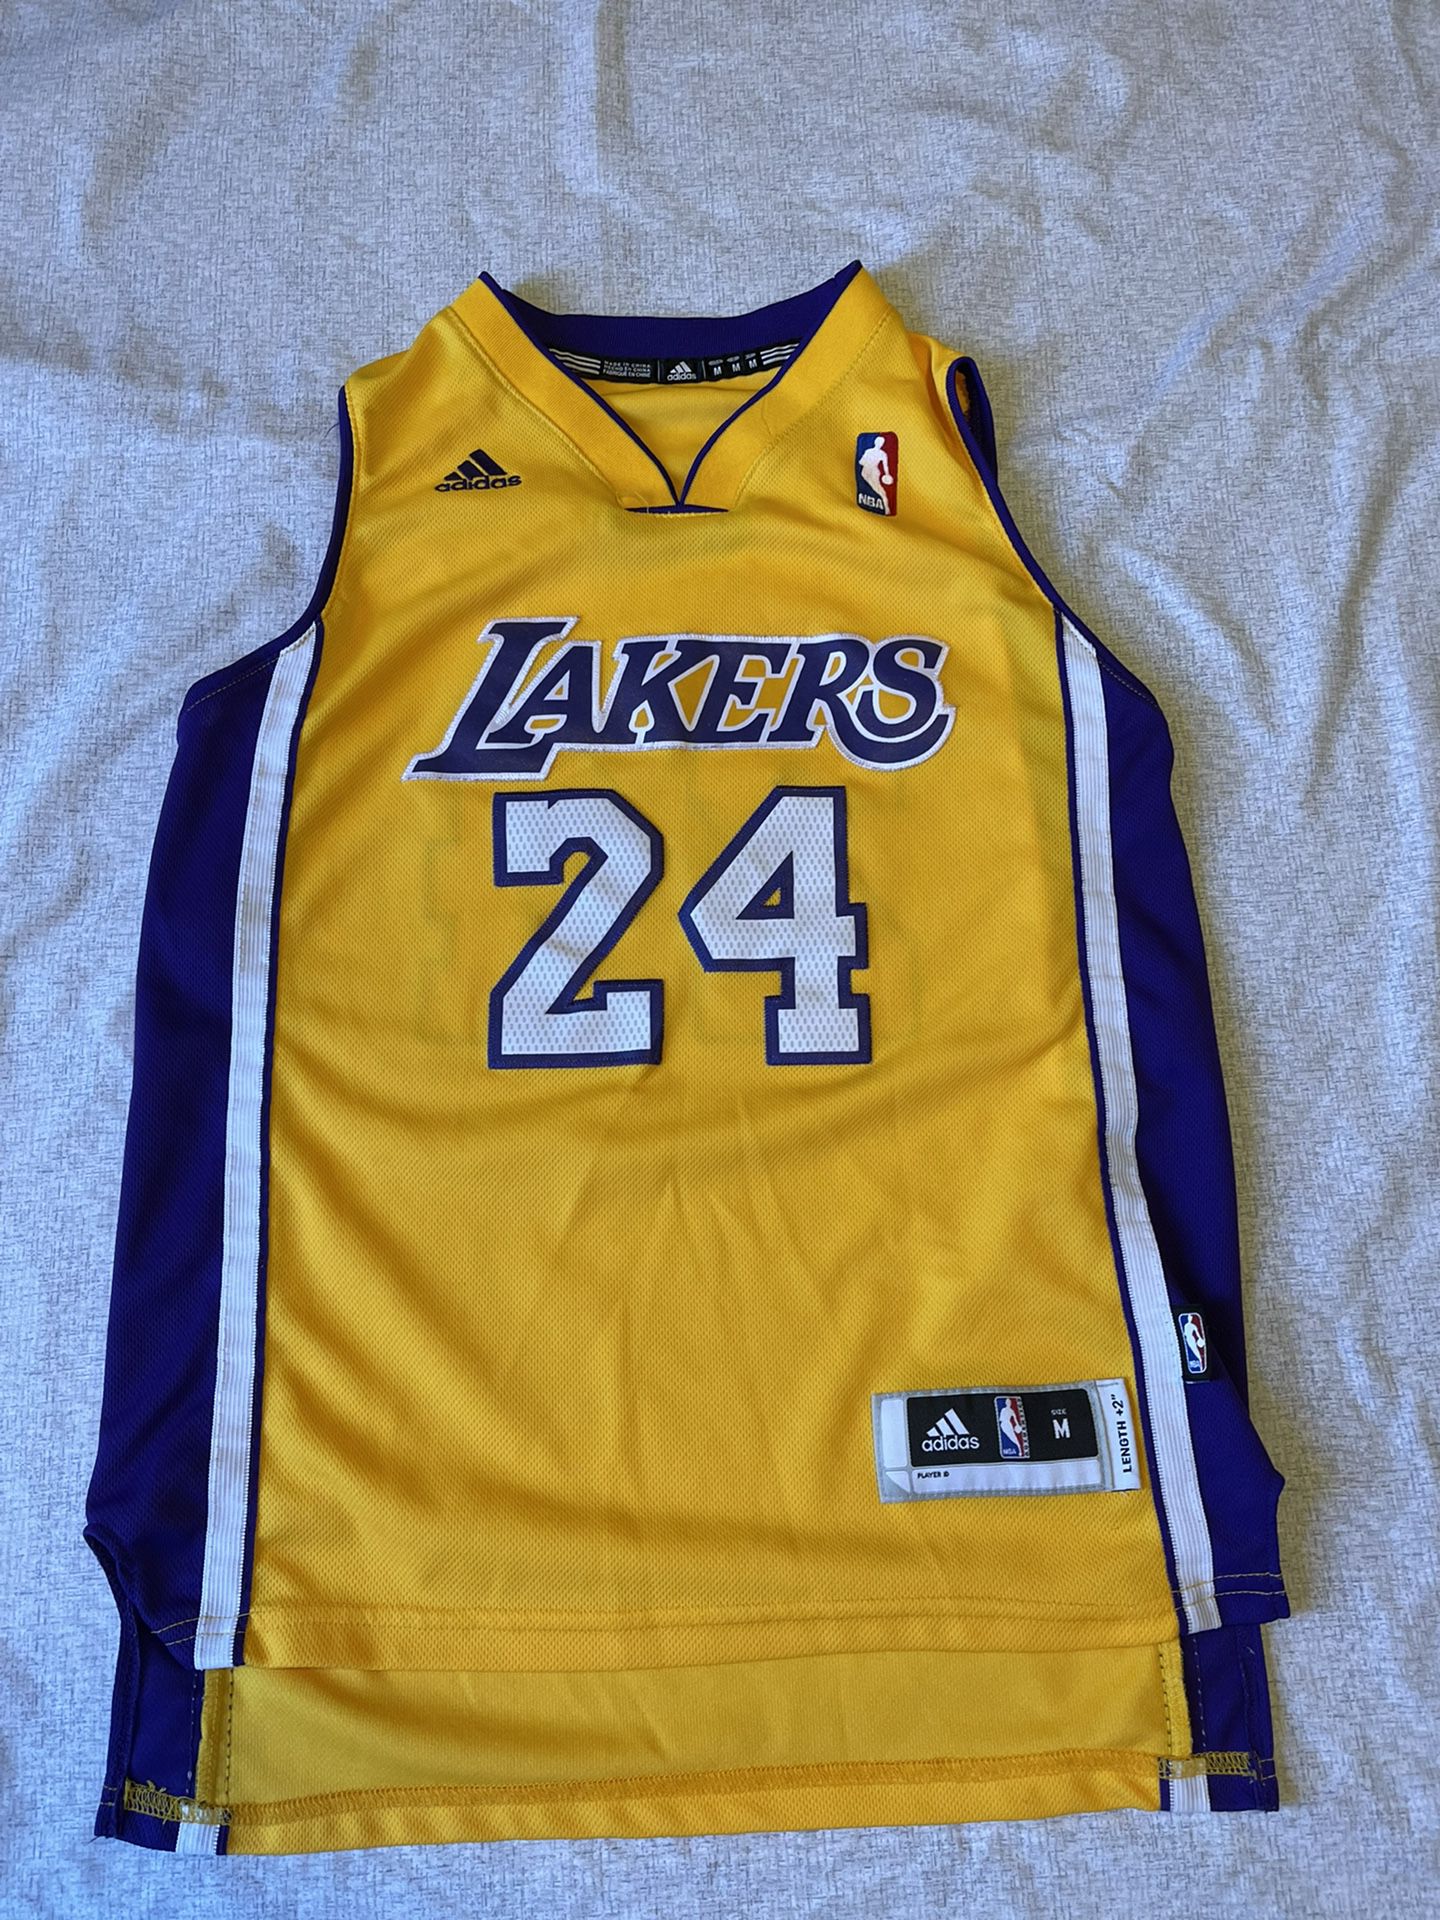 Adidas Size Medium Kobe Bryant LA Los Angeles Lakers Jersey Youth #24 Used  for Sale in Palo Alto, CA - OfferUp